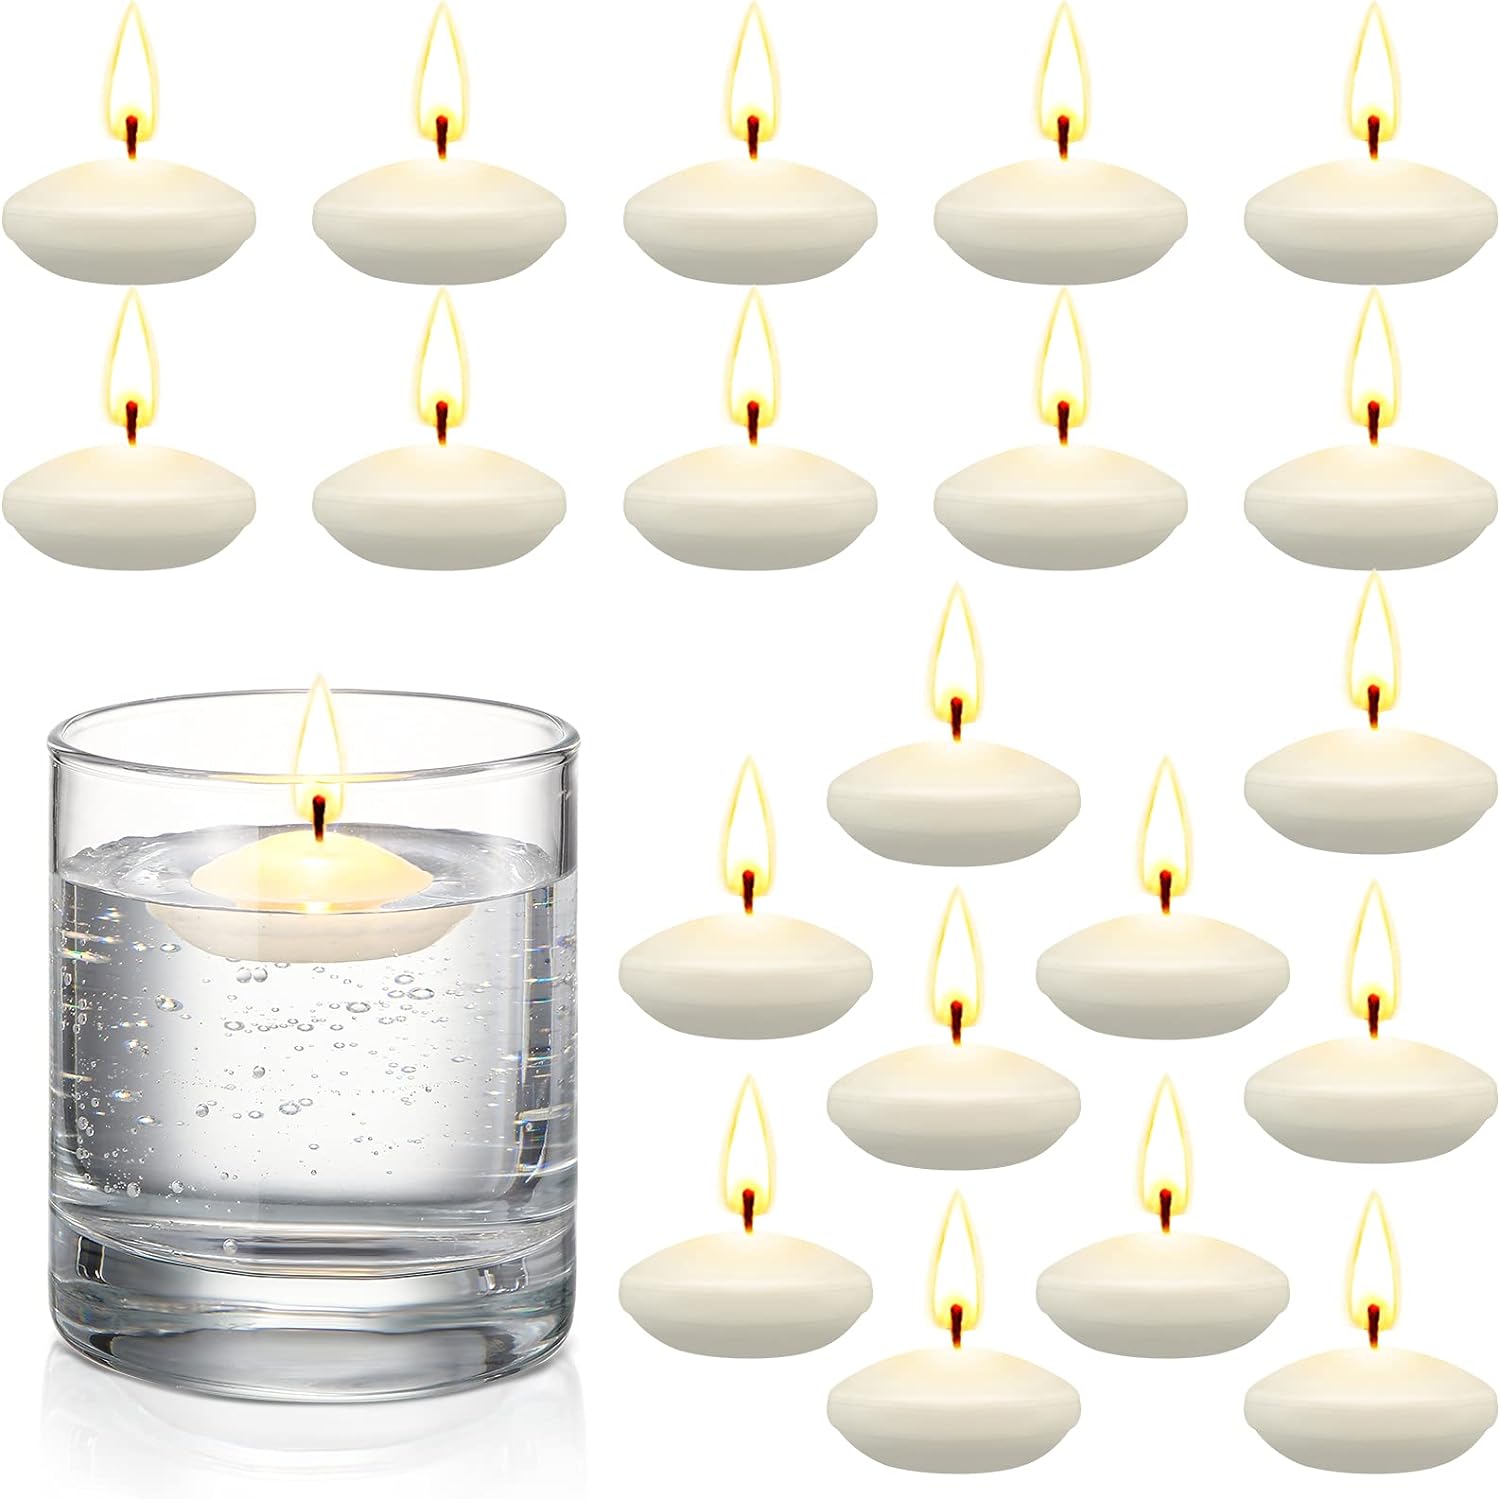 20 Pieces 1.5 Inch Unscented Floating Candles for Centerpieces, Floating Pool Candles Round Burning Candles Decor for Valentine' Day, Wedding Party Swimming Pool Bathtub Dinner Party Favor (White)